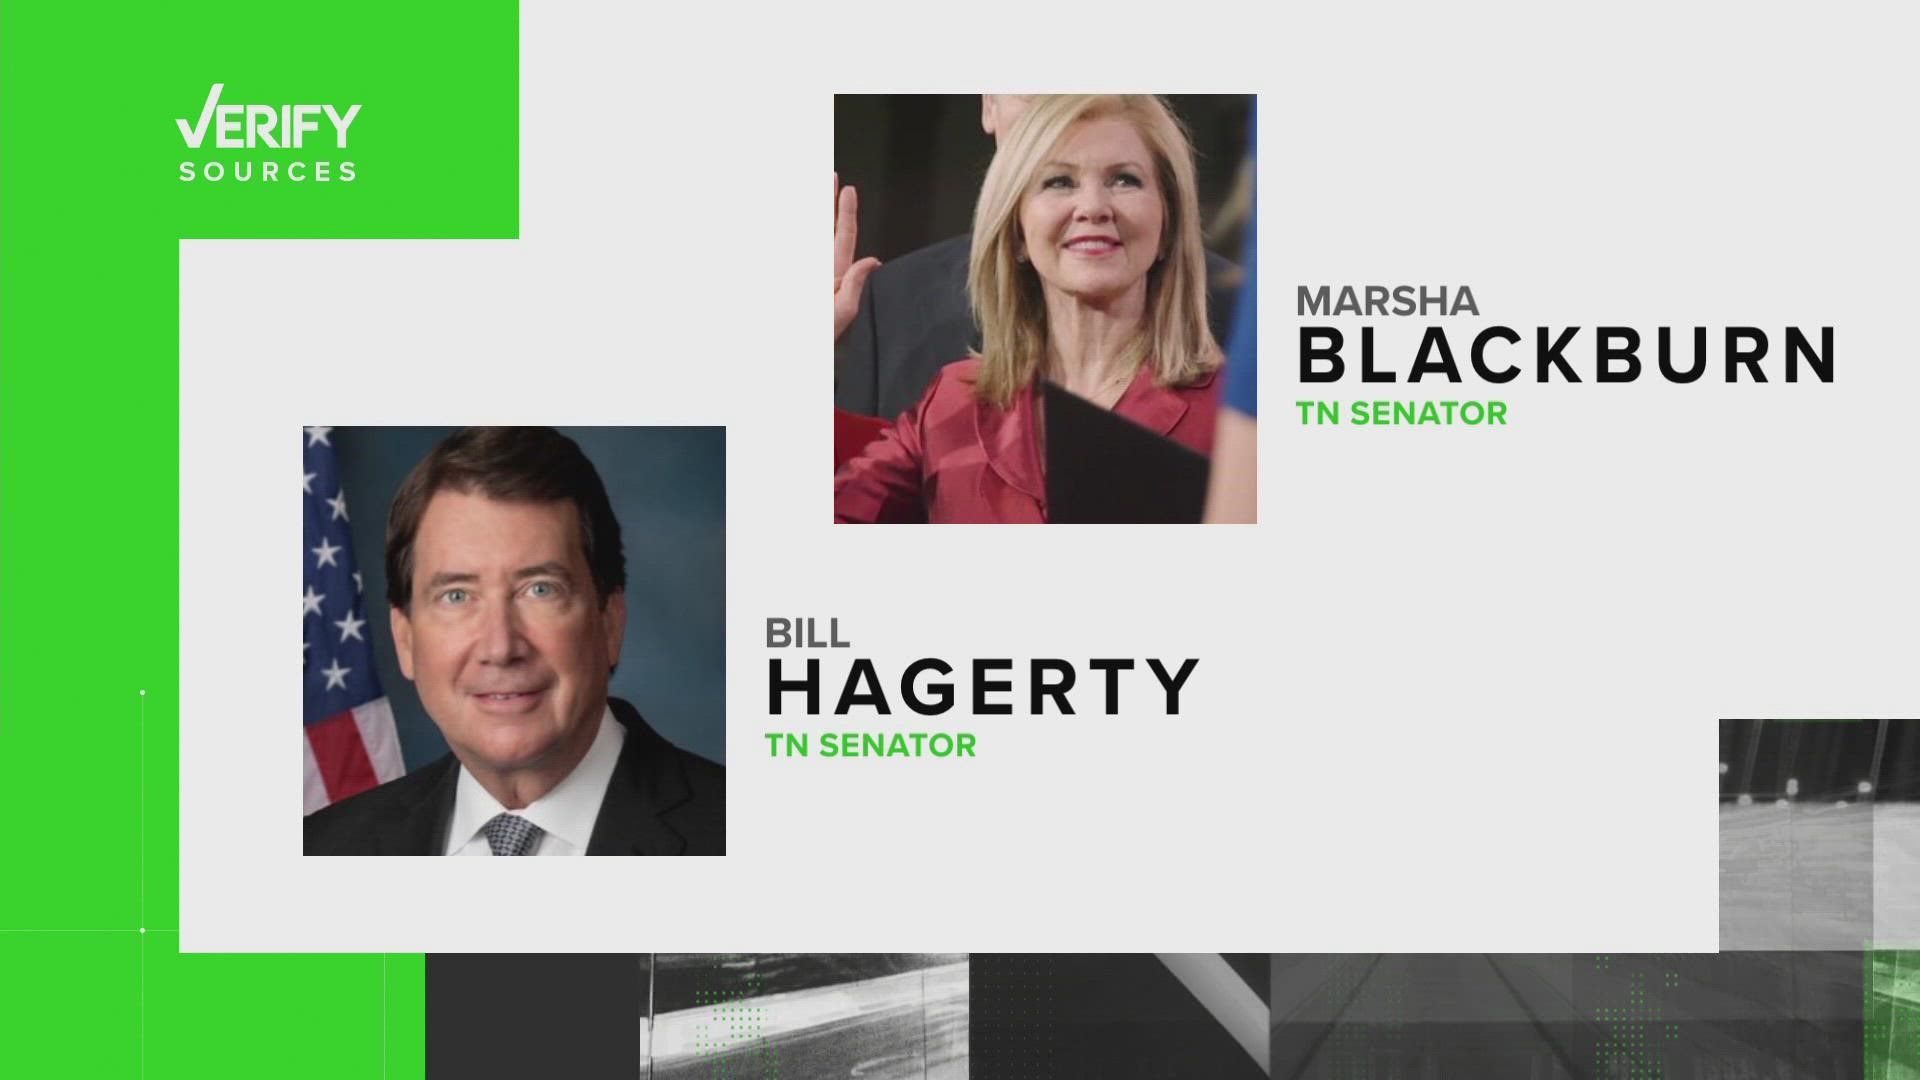 Both Senator Marsha Blackburn (R) and Senator Bill Hagerty (R) voted against a cloture motion on the Honoring our PACT Act of 2022, which could benefit veterans.